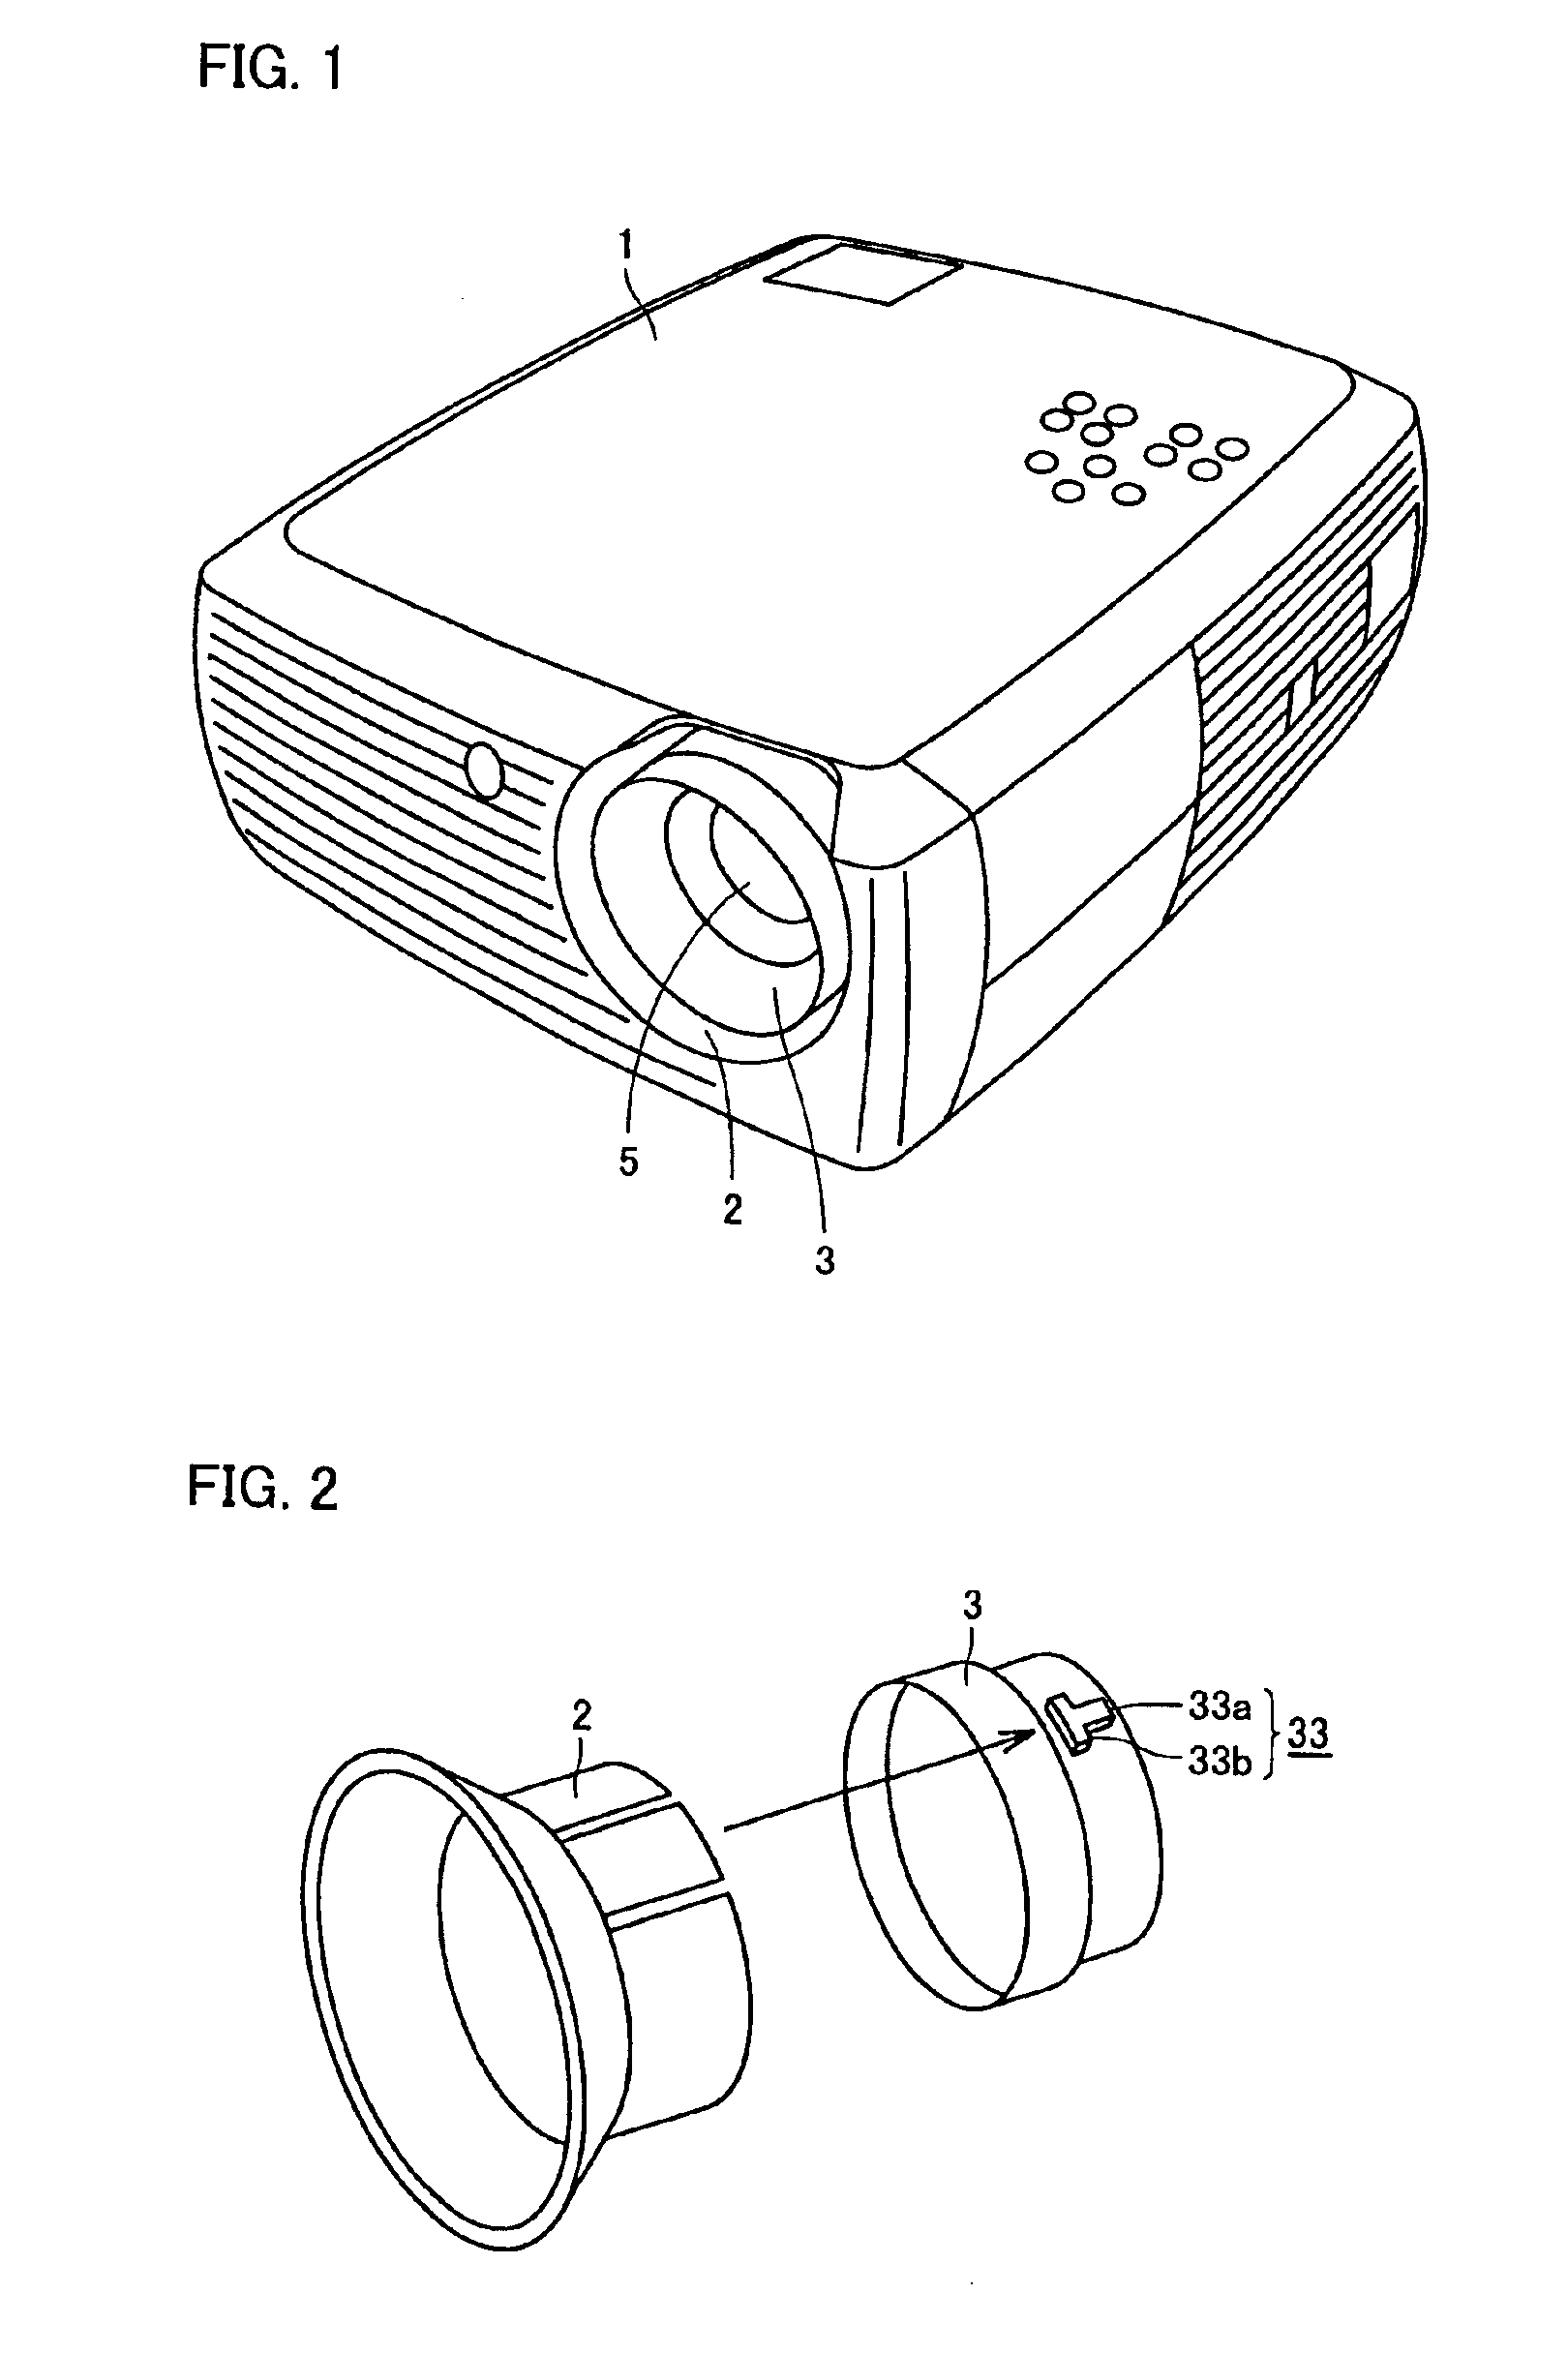 Projector with improved focus ring